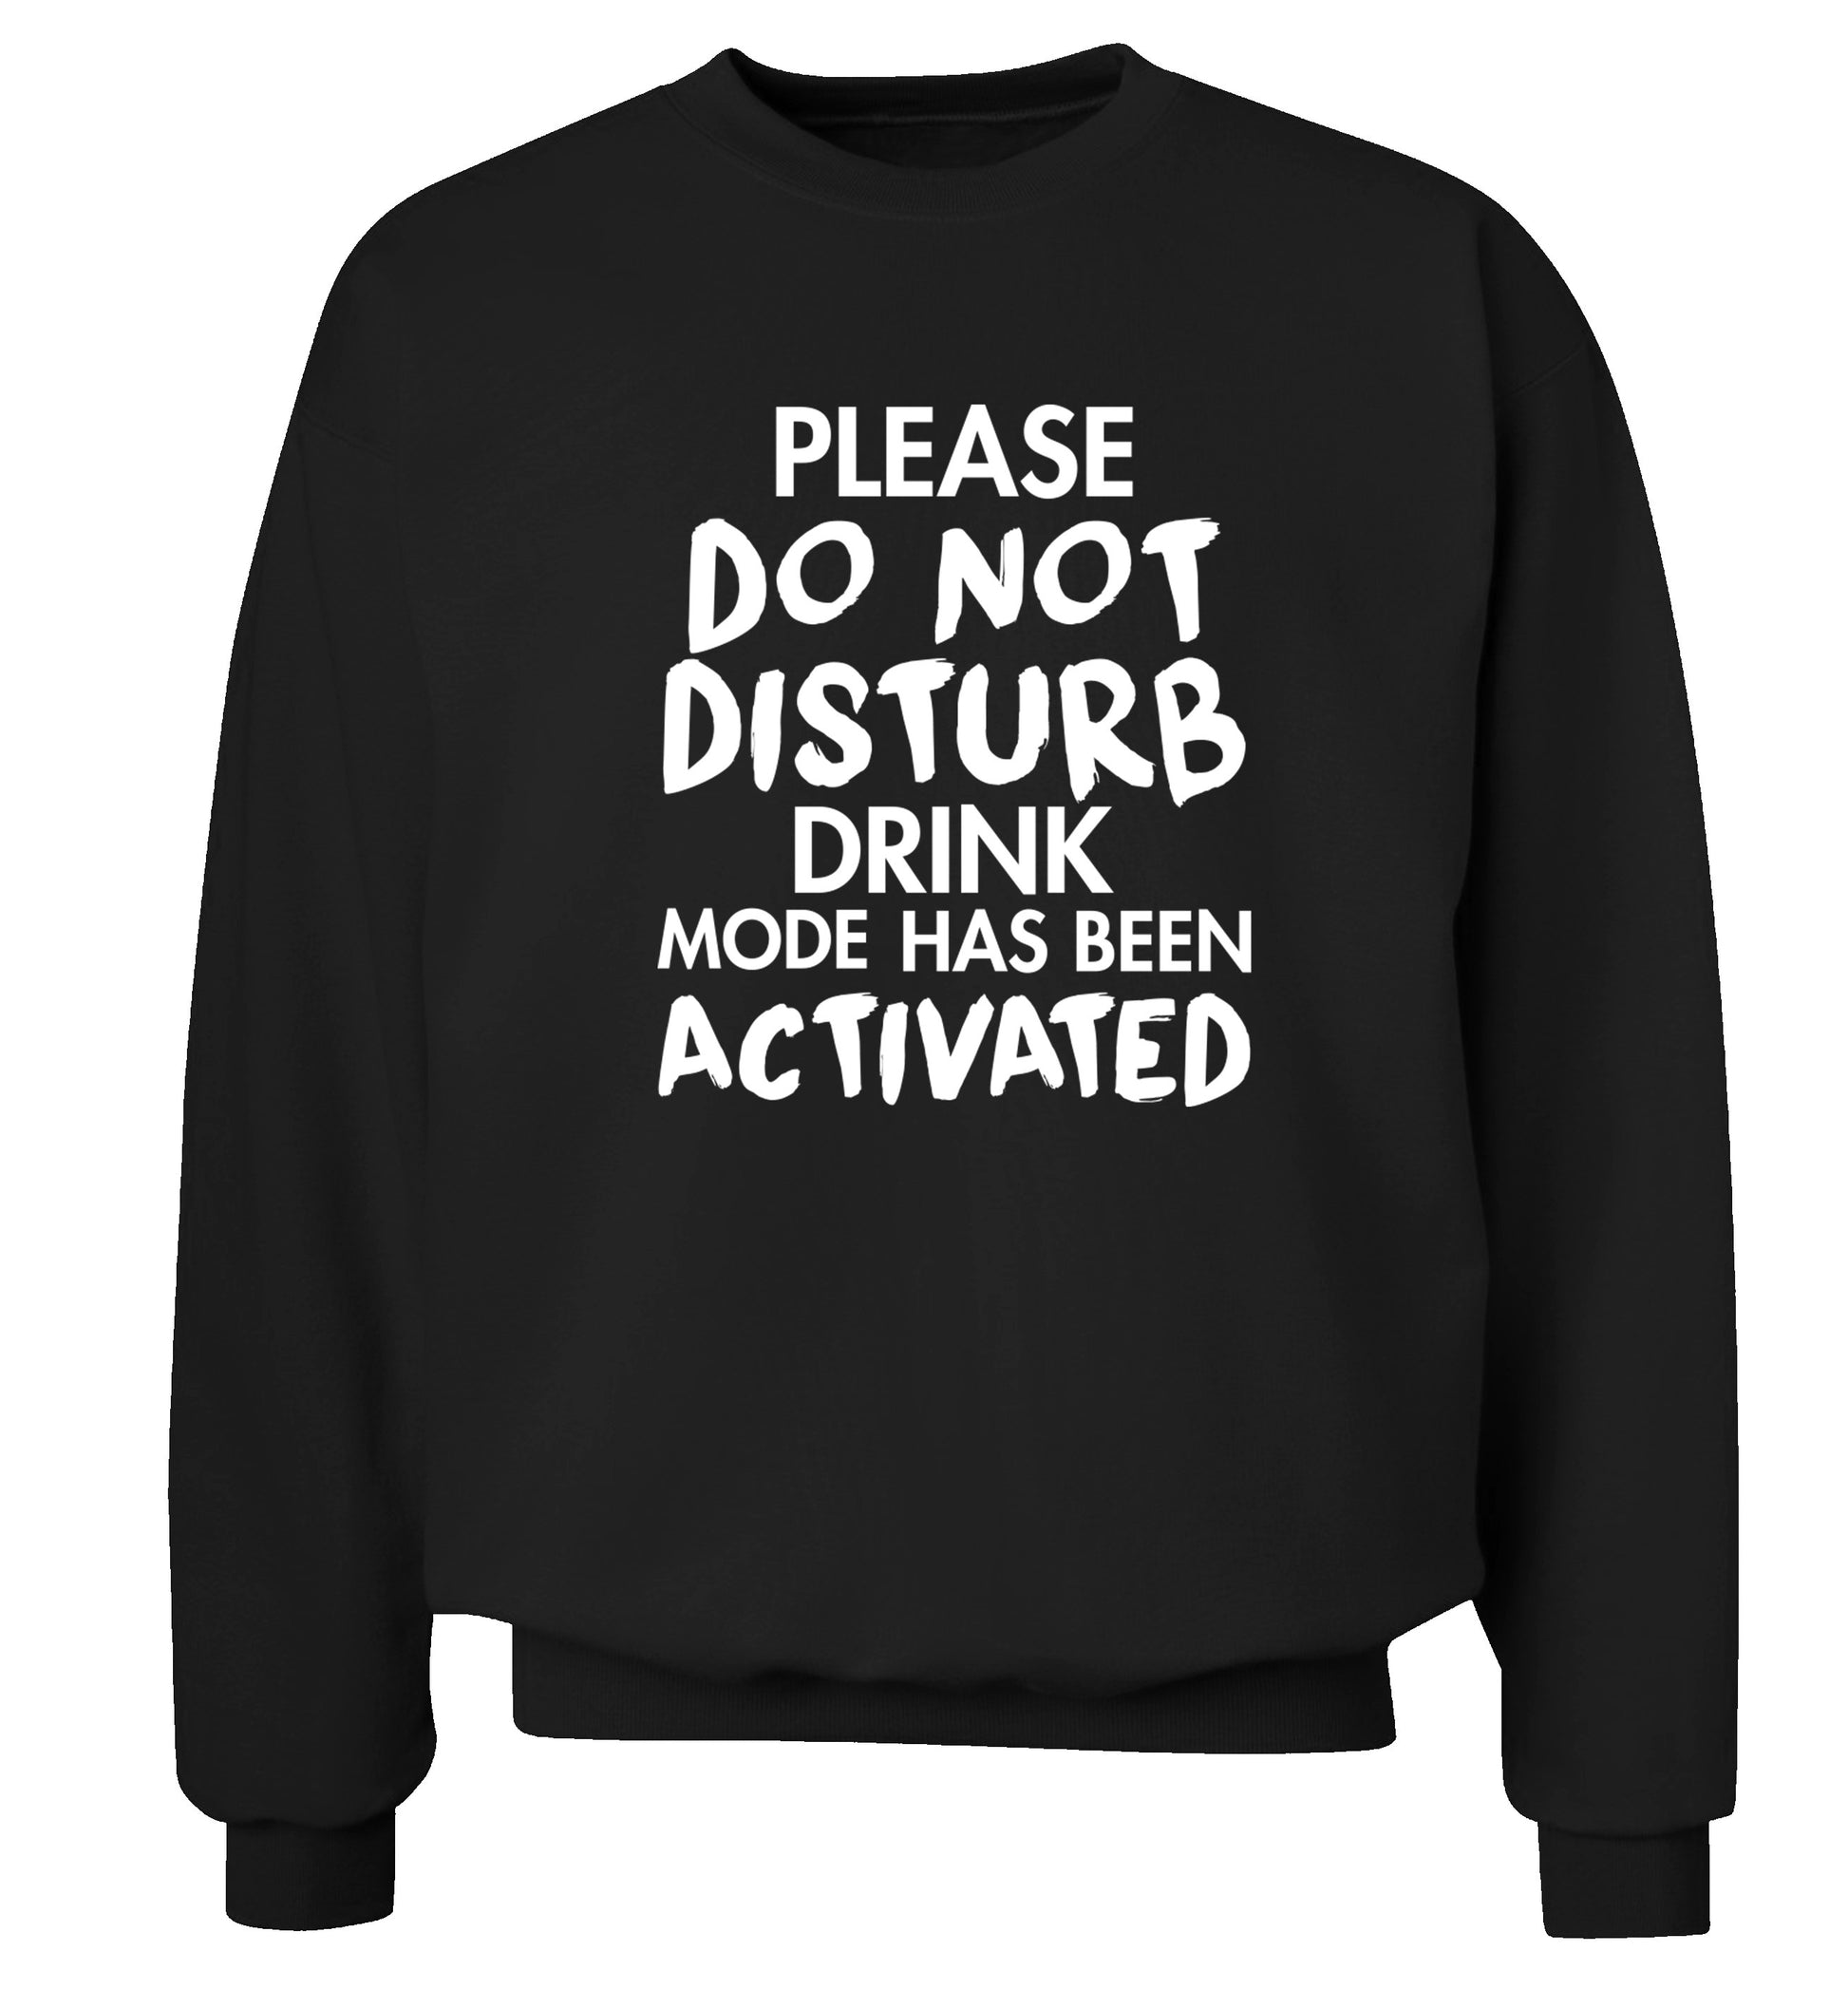 Please do not disturb drink mode has been activated Adult's unisex black Sweater 2XL